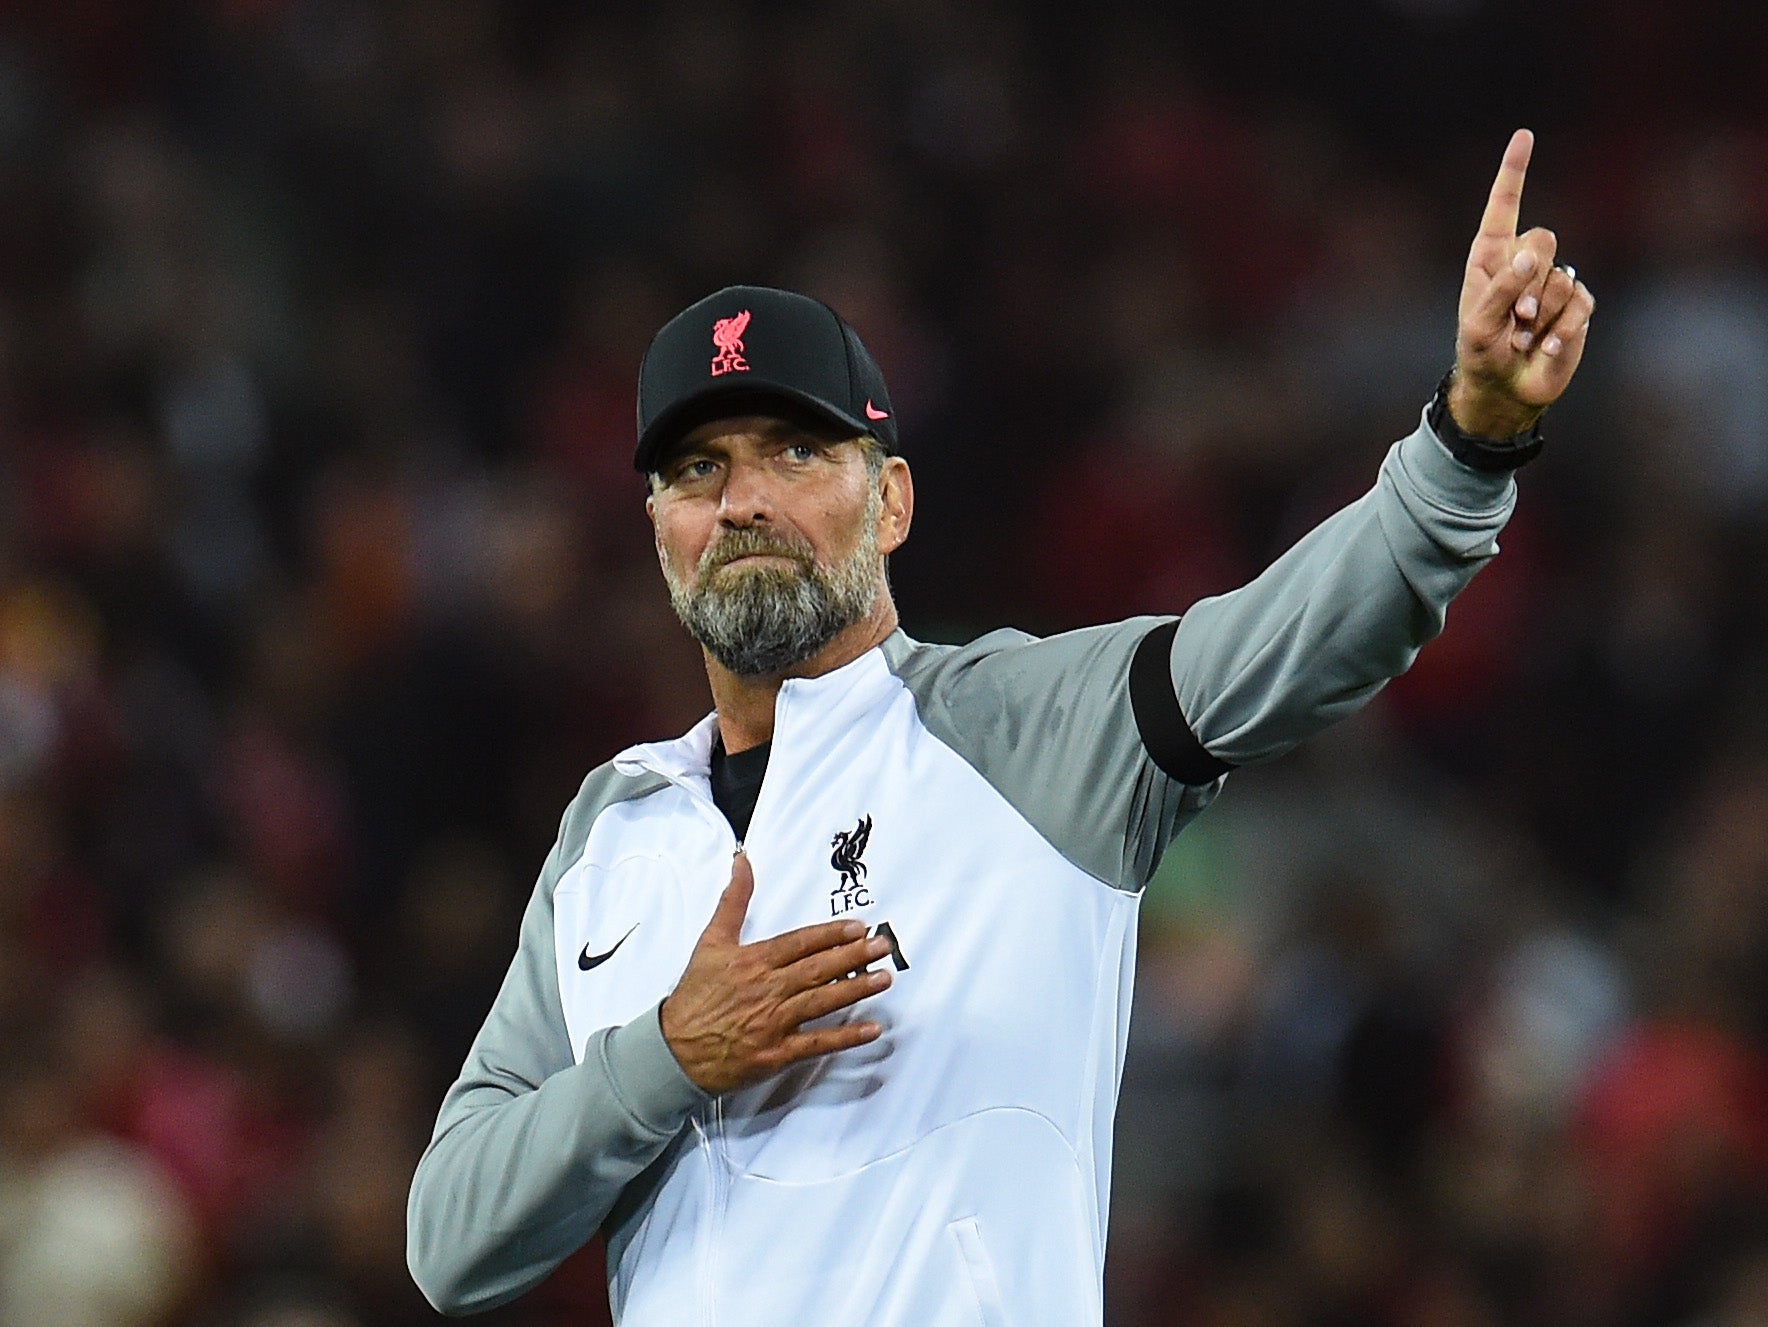 Jurgen Klopp at the end of the Champions League match against Ajax